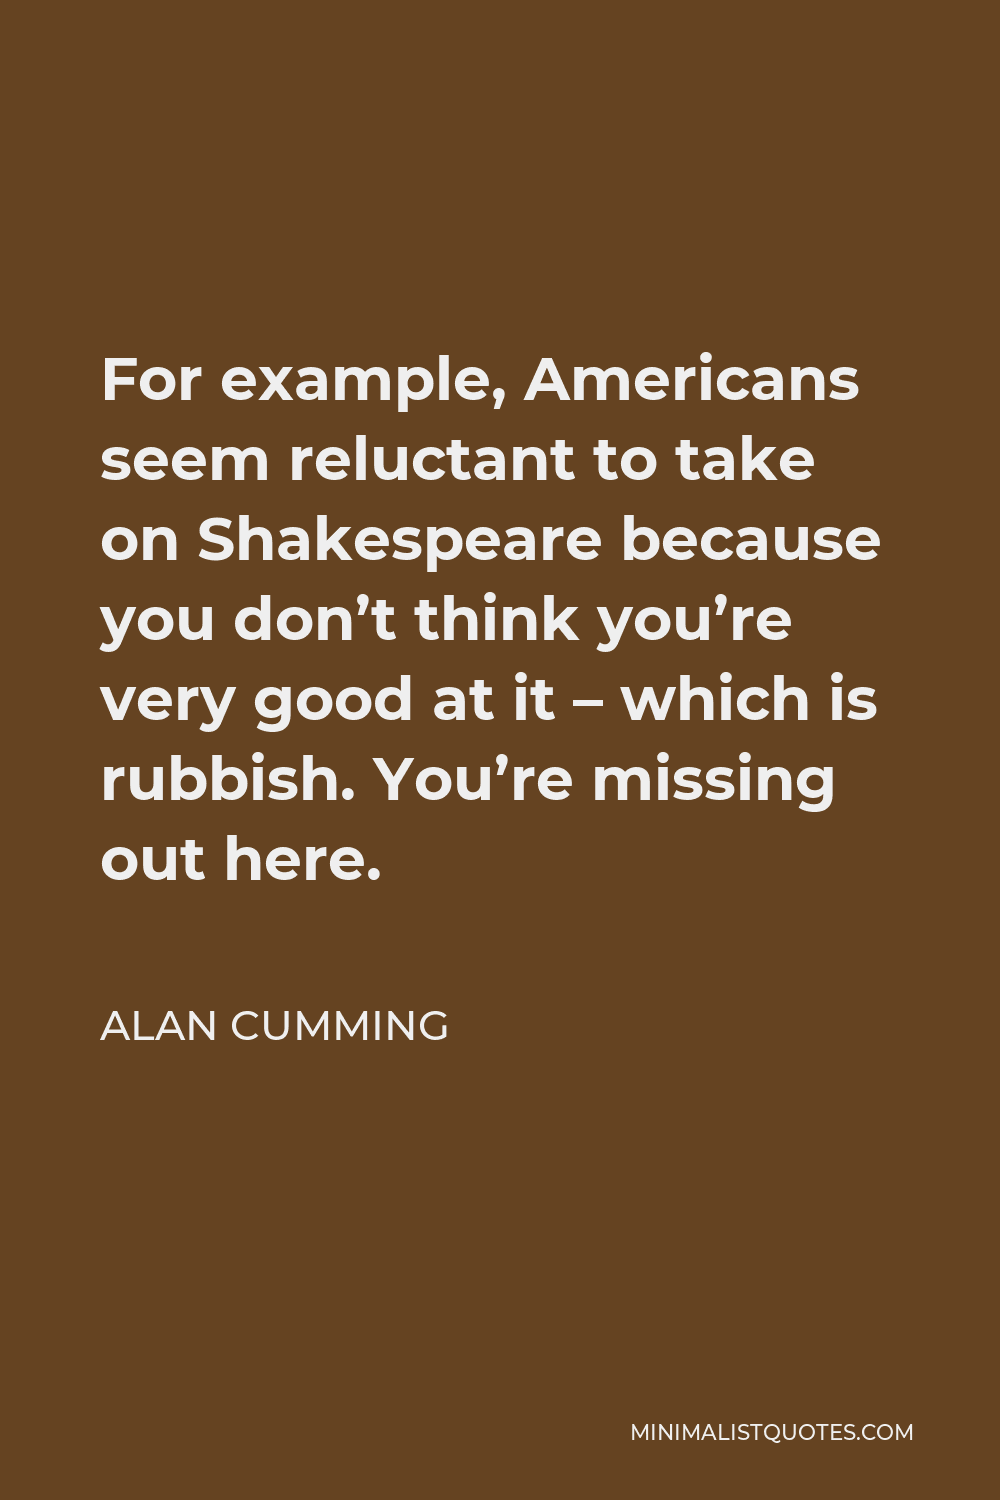 Alan Cumming Quote - For example, Americans seem reluctant to take on Shakespeare because you don’t think you’re very good at it – which is rubbish. You’re missing out here.